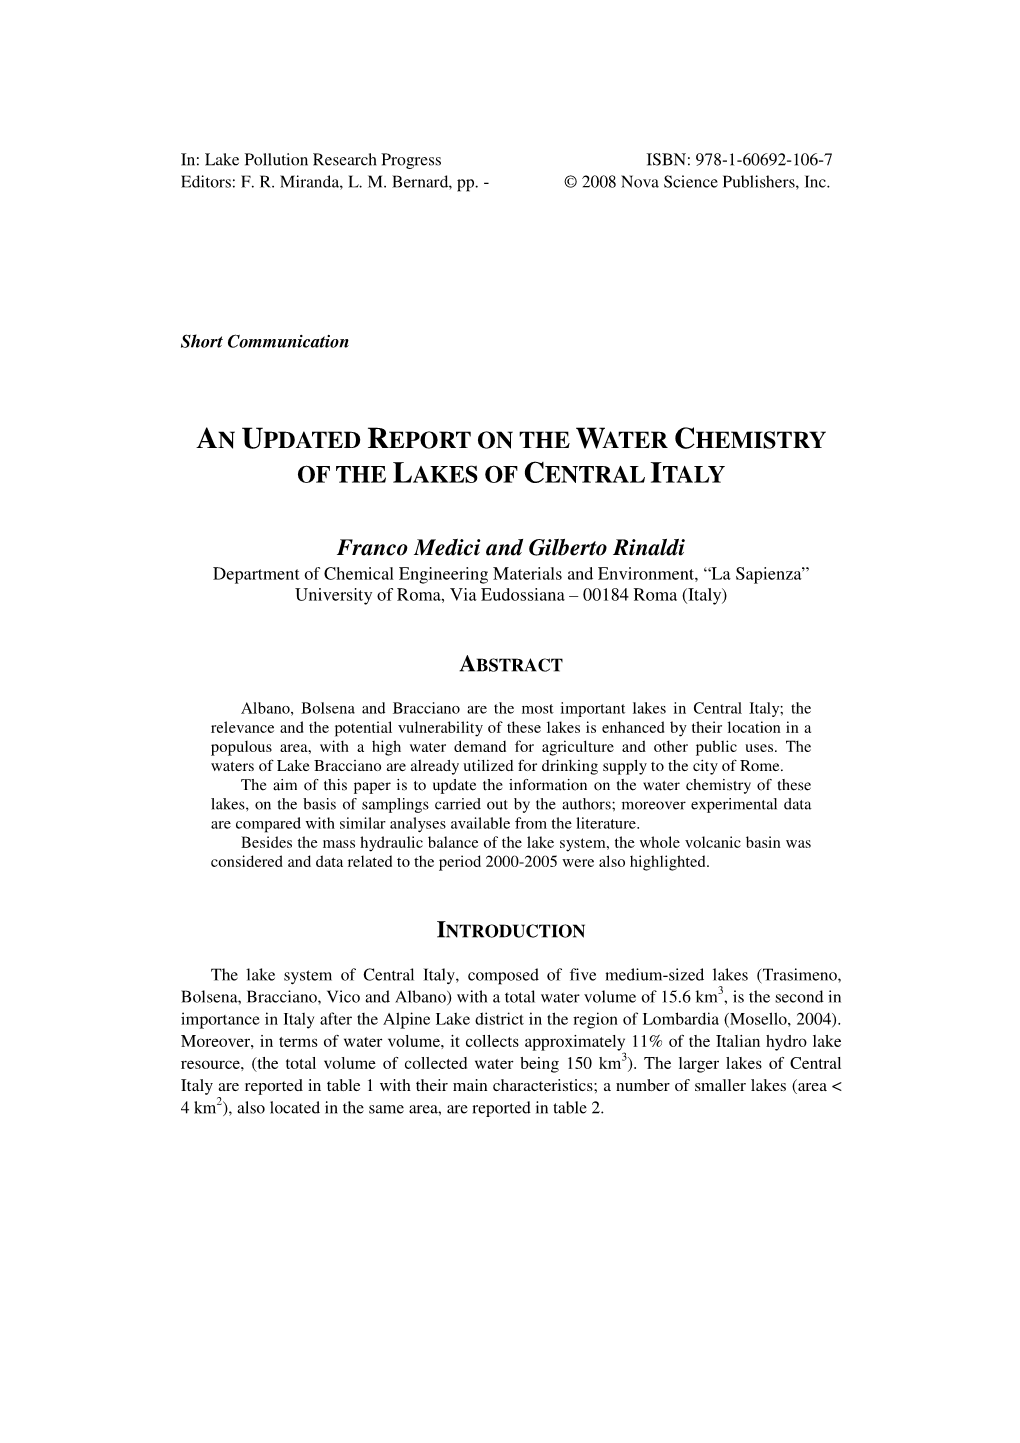 An Updated Report on the Water Chemistry of the Lakes of Central Italy